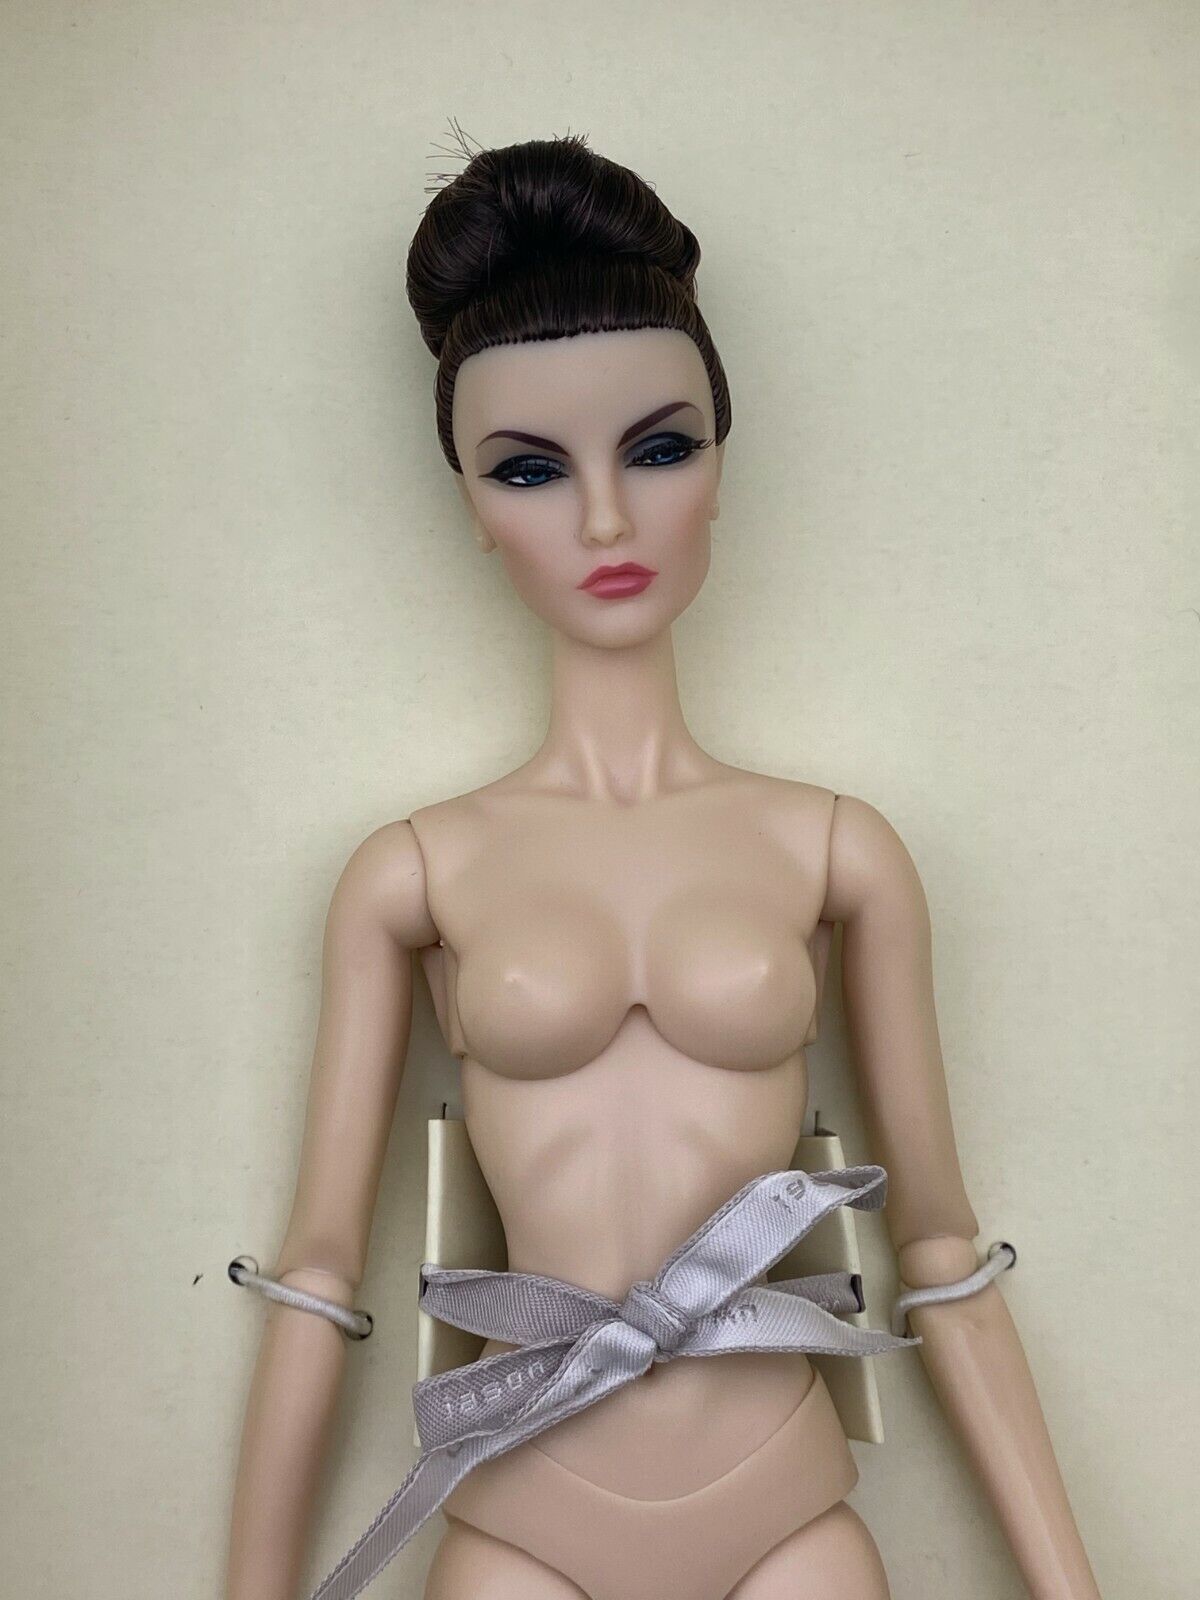 Elyse Elise Jolie Most Wanted Doll Integrity Toys Fashion Royalty 12" Nude Doll